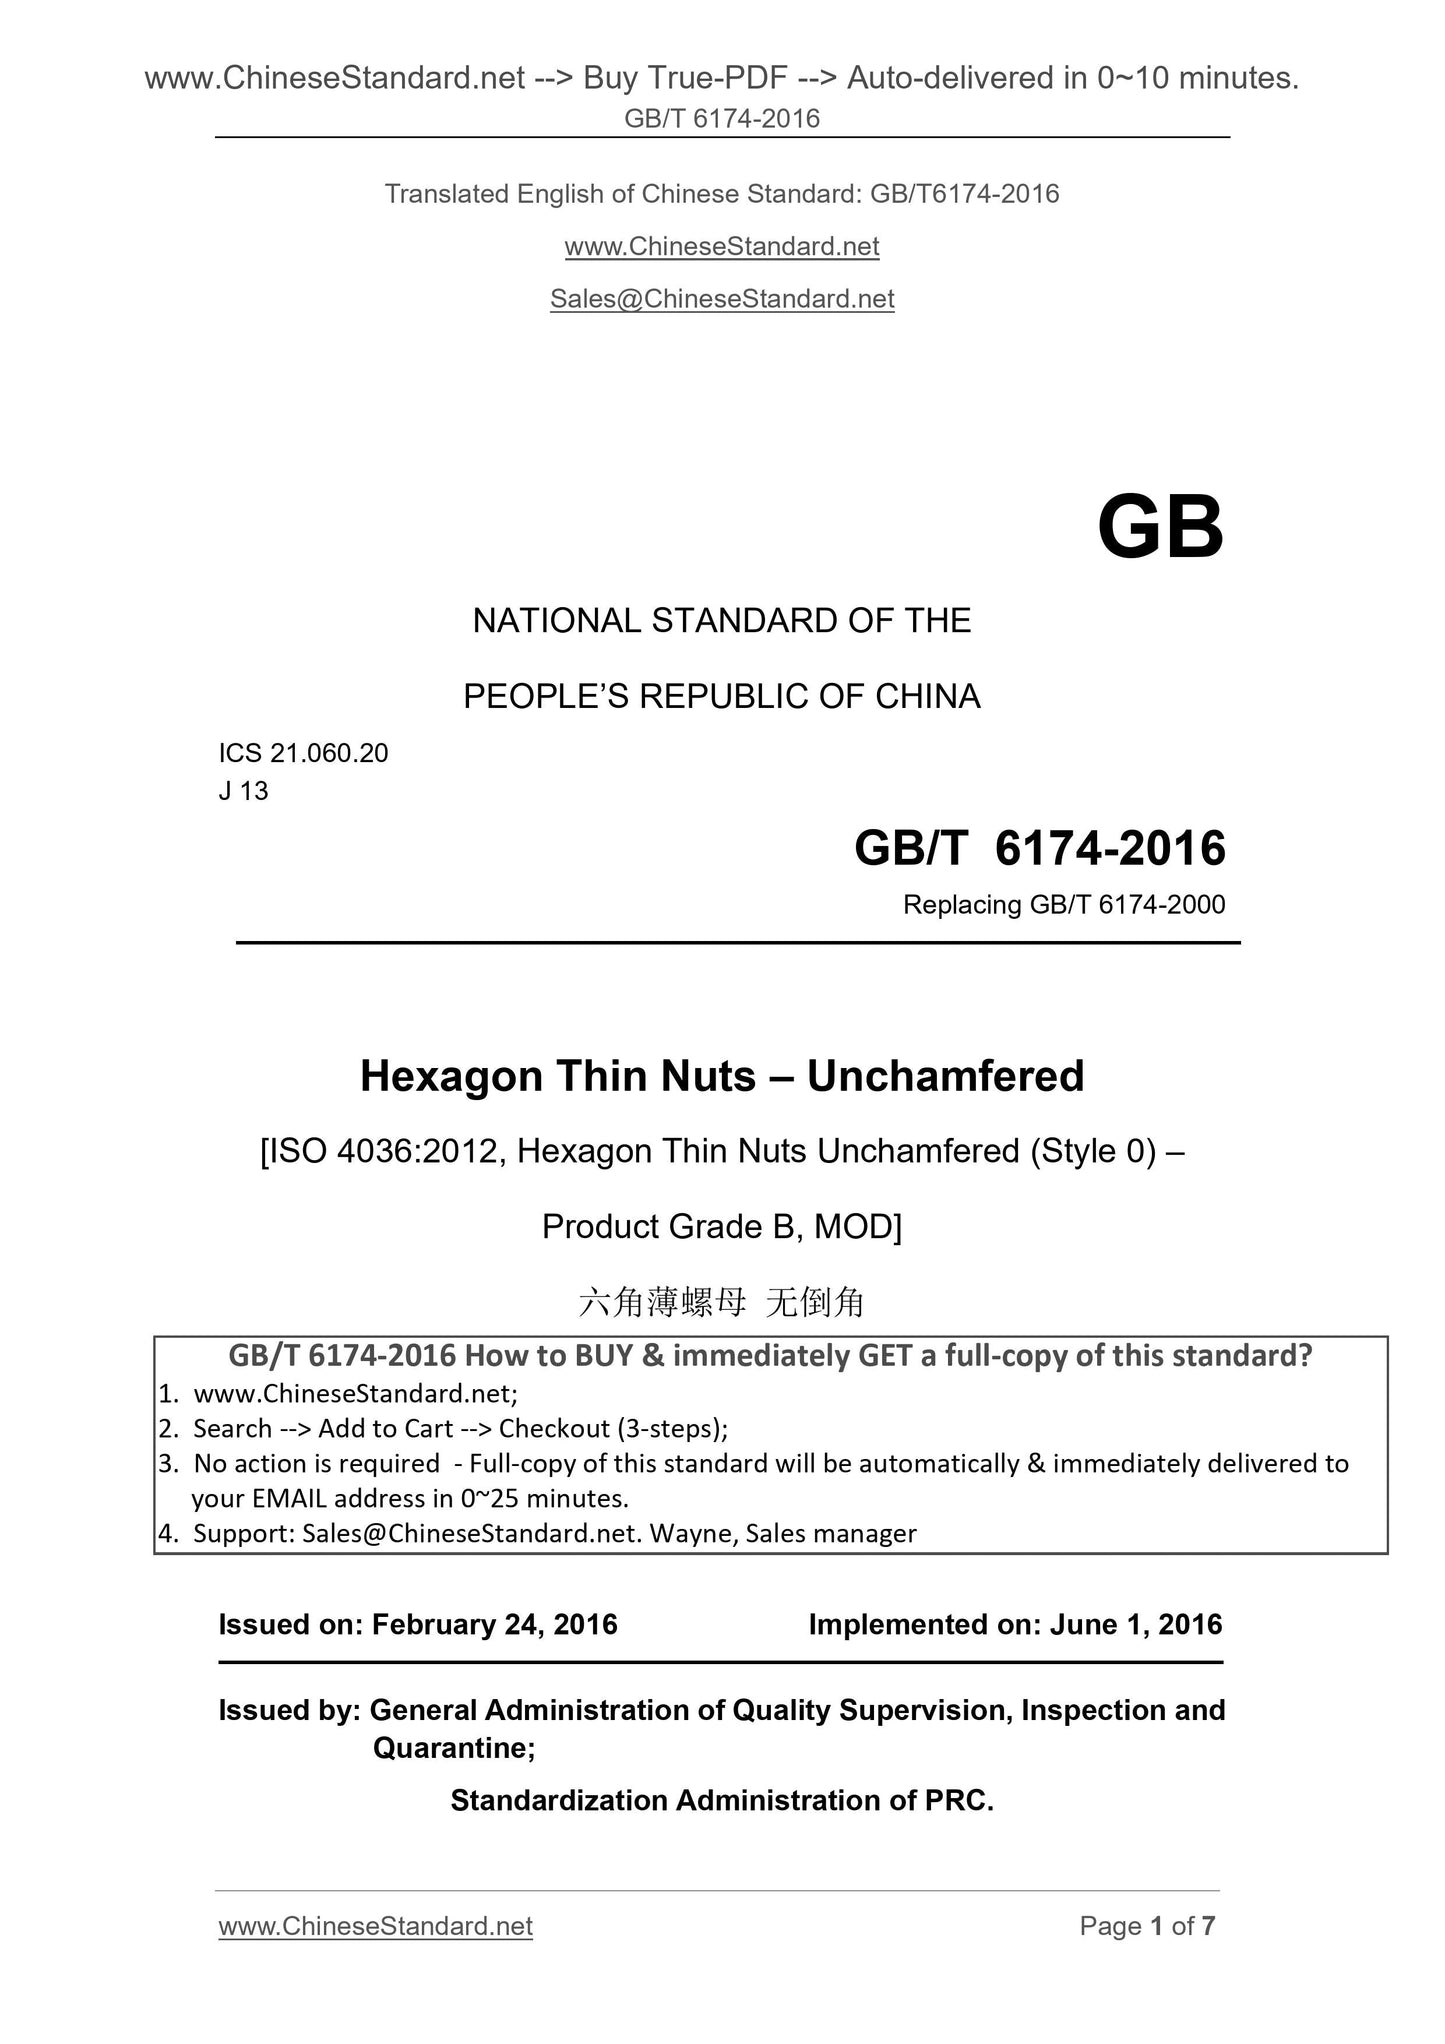 GB/T 6174-2016 Page 1